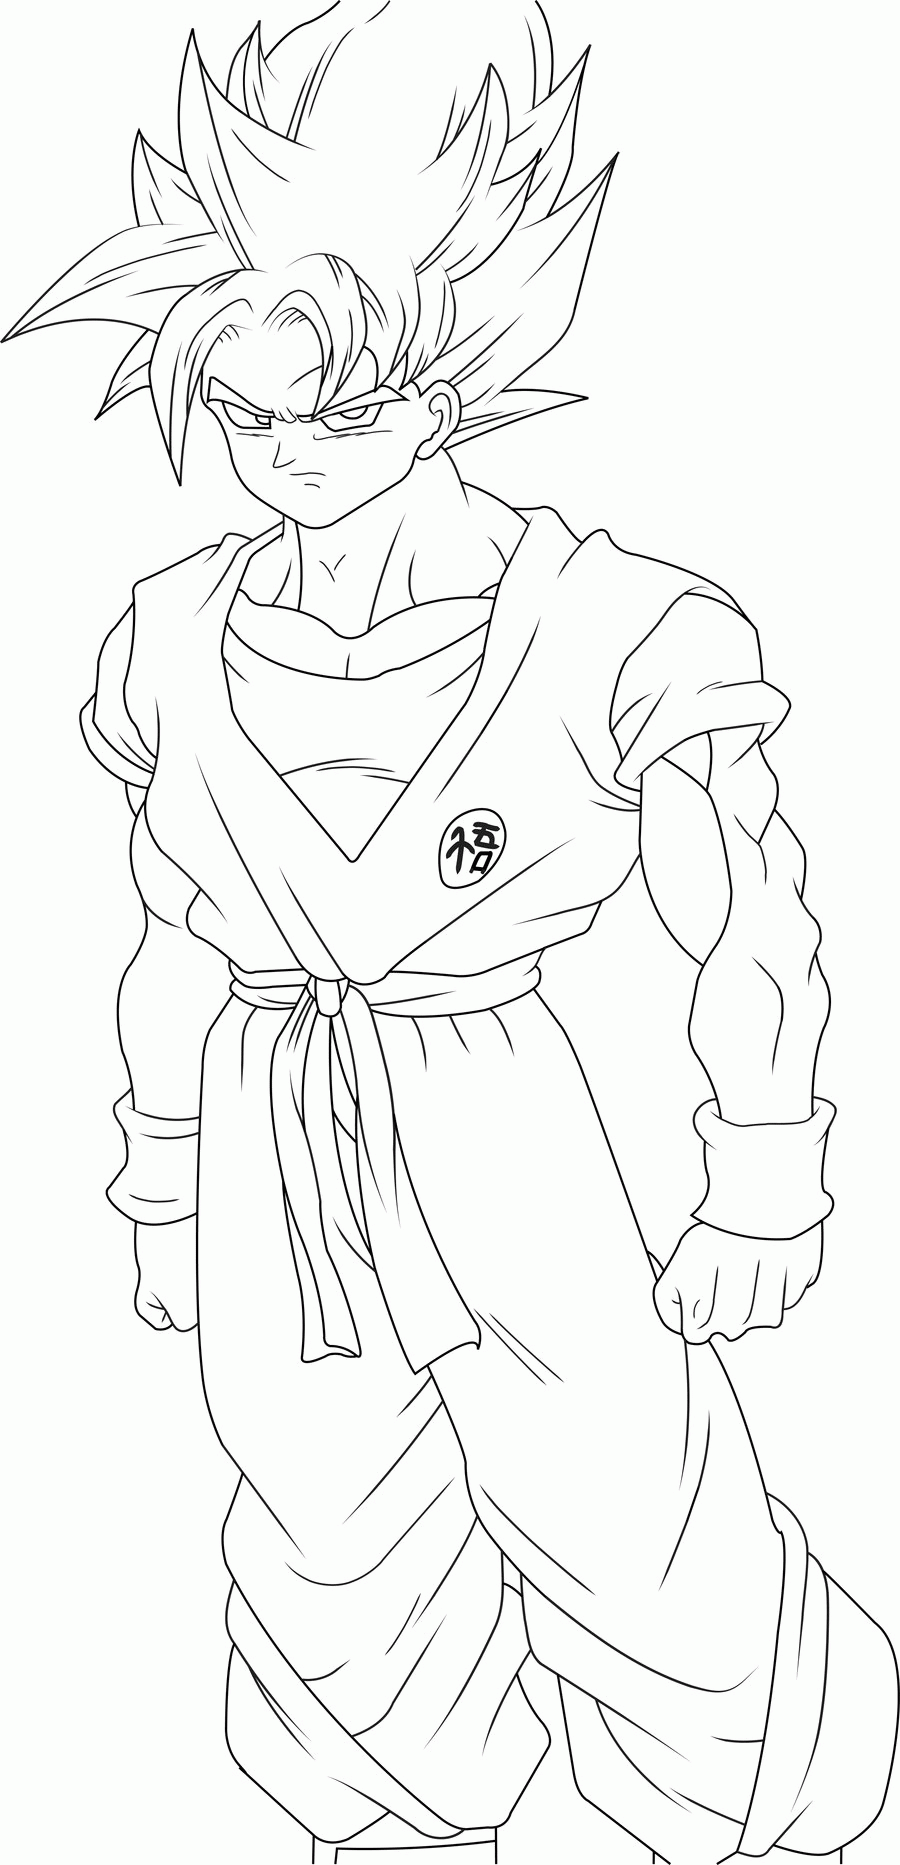 Ssj4 Goku Coloring Page - Coloring Home